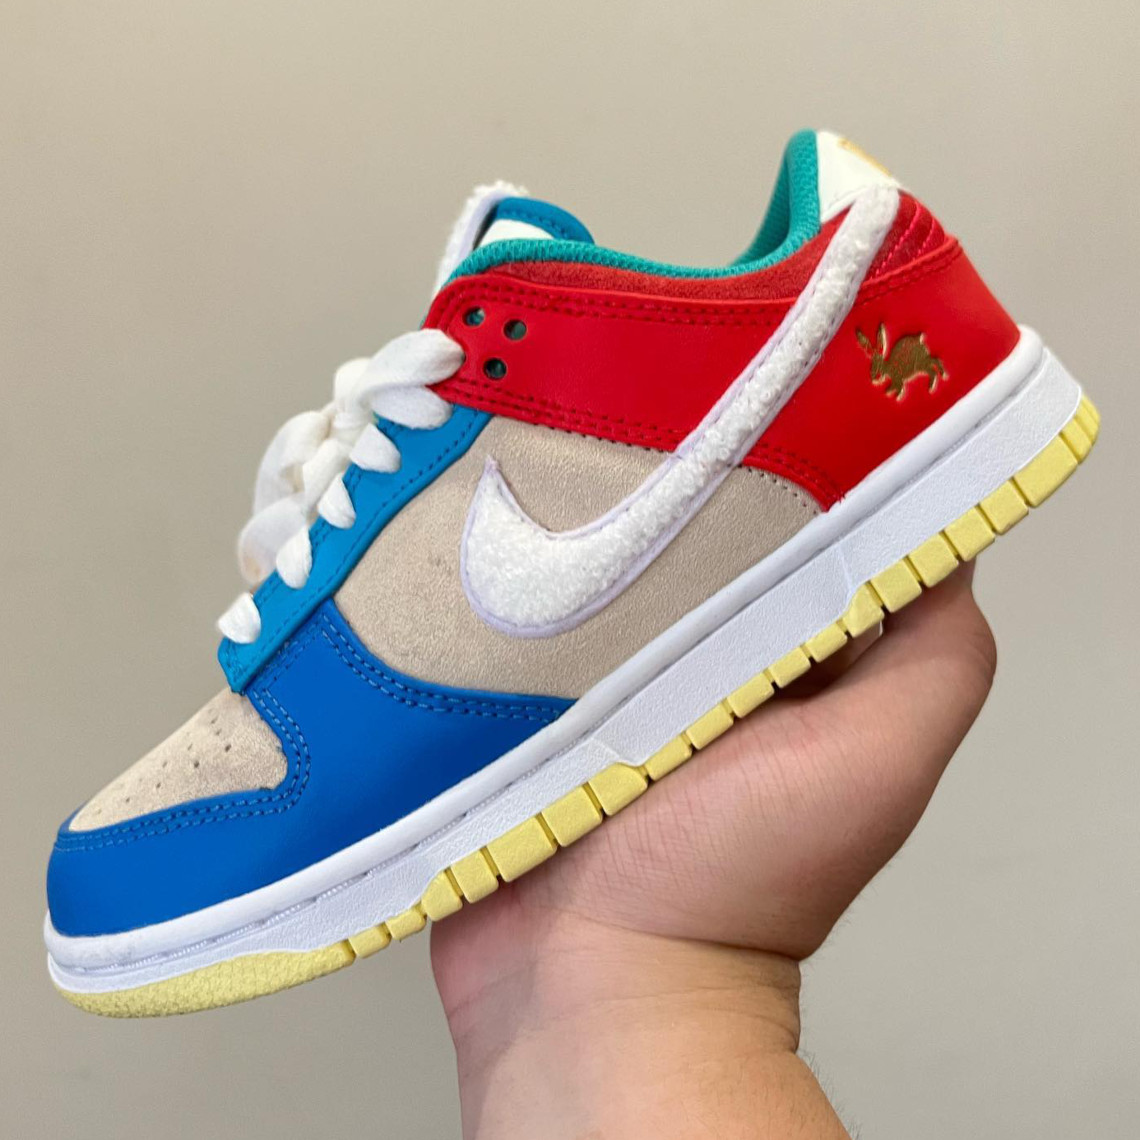 Nike Dunk Low "Year of the Rabbit" CNY 2023